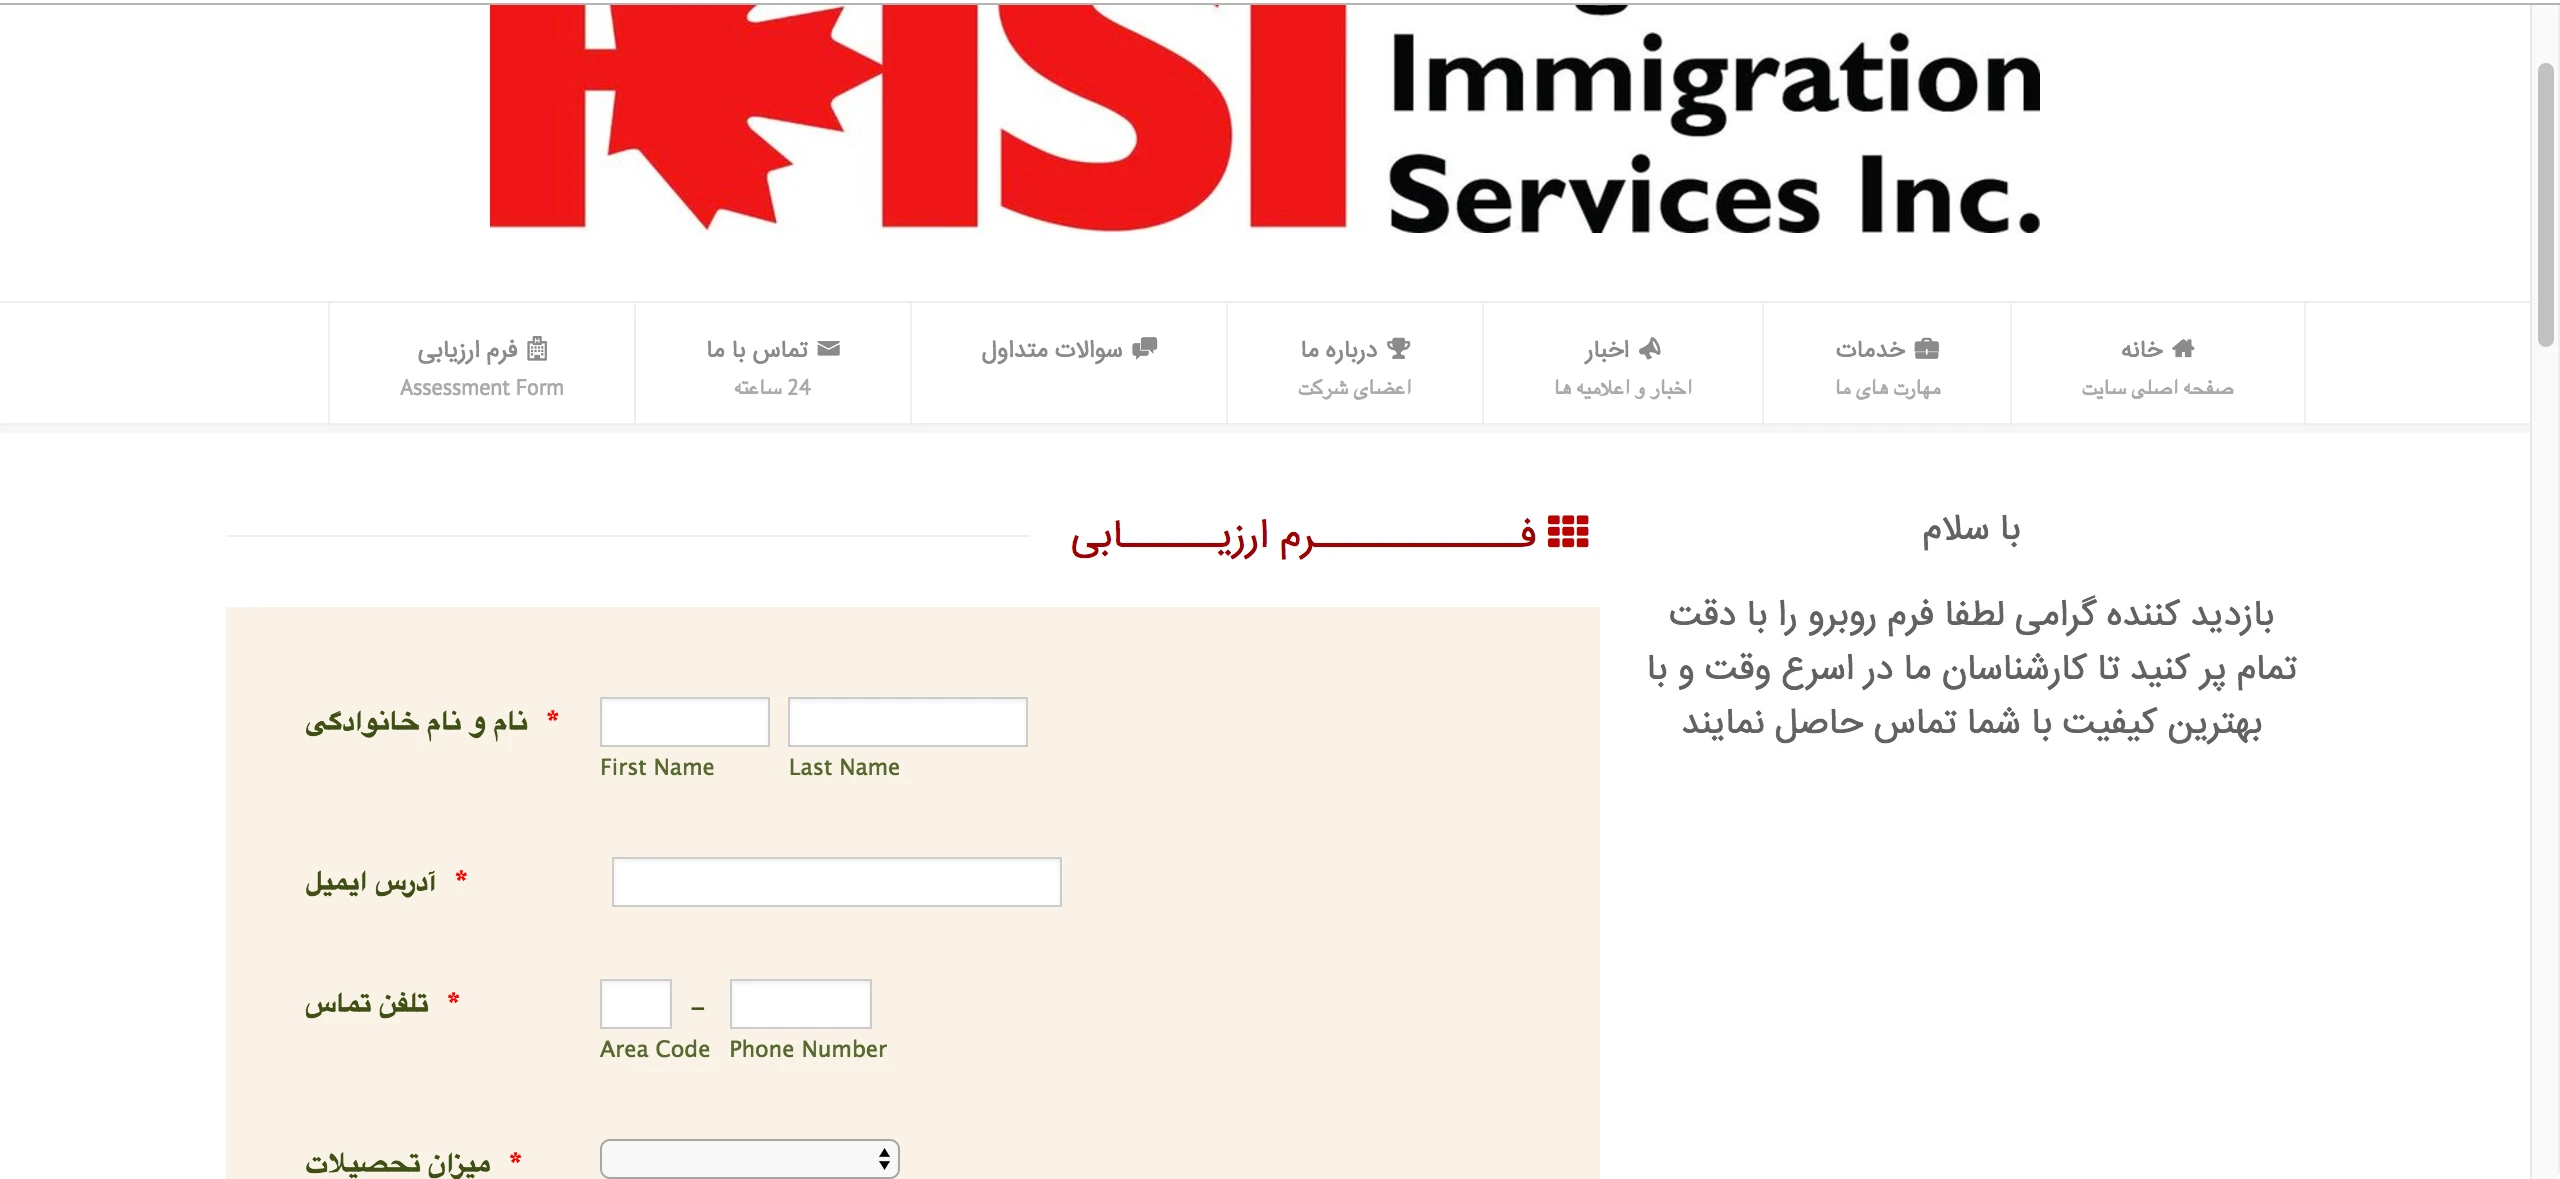 Unable to load forms in Iraq Image 1 Screenshot 20